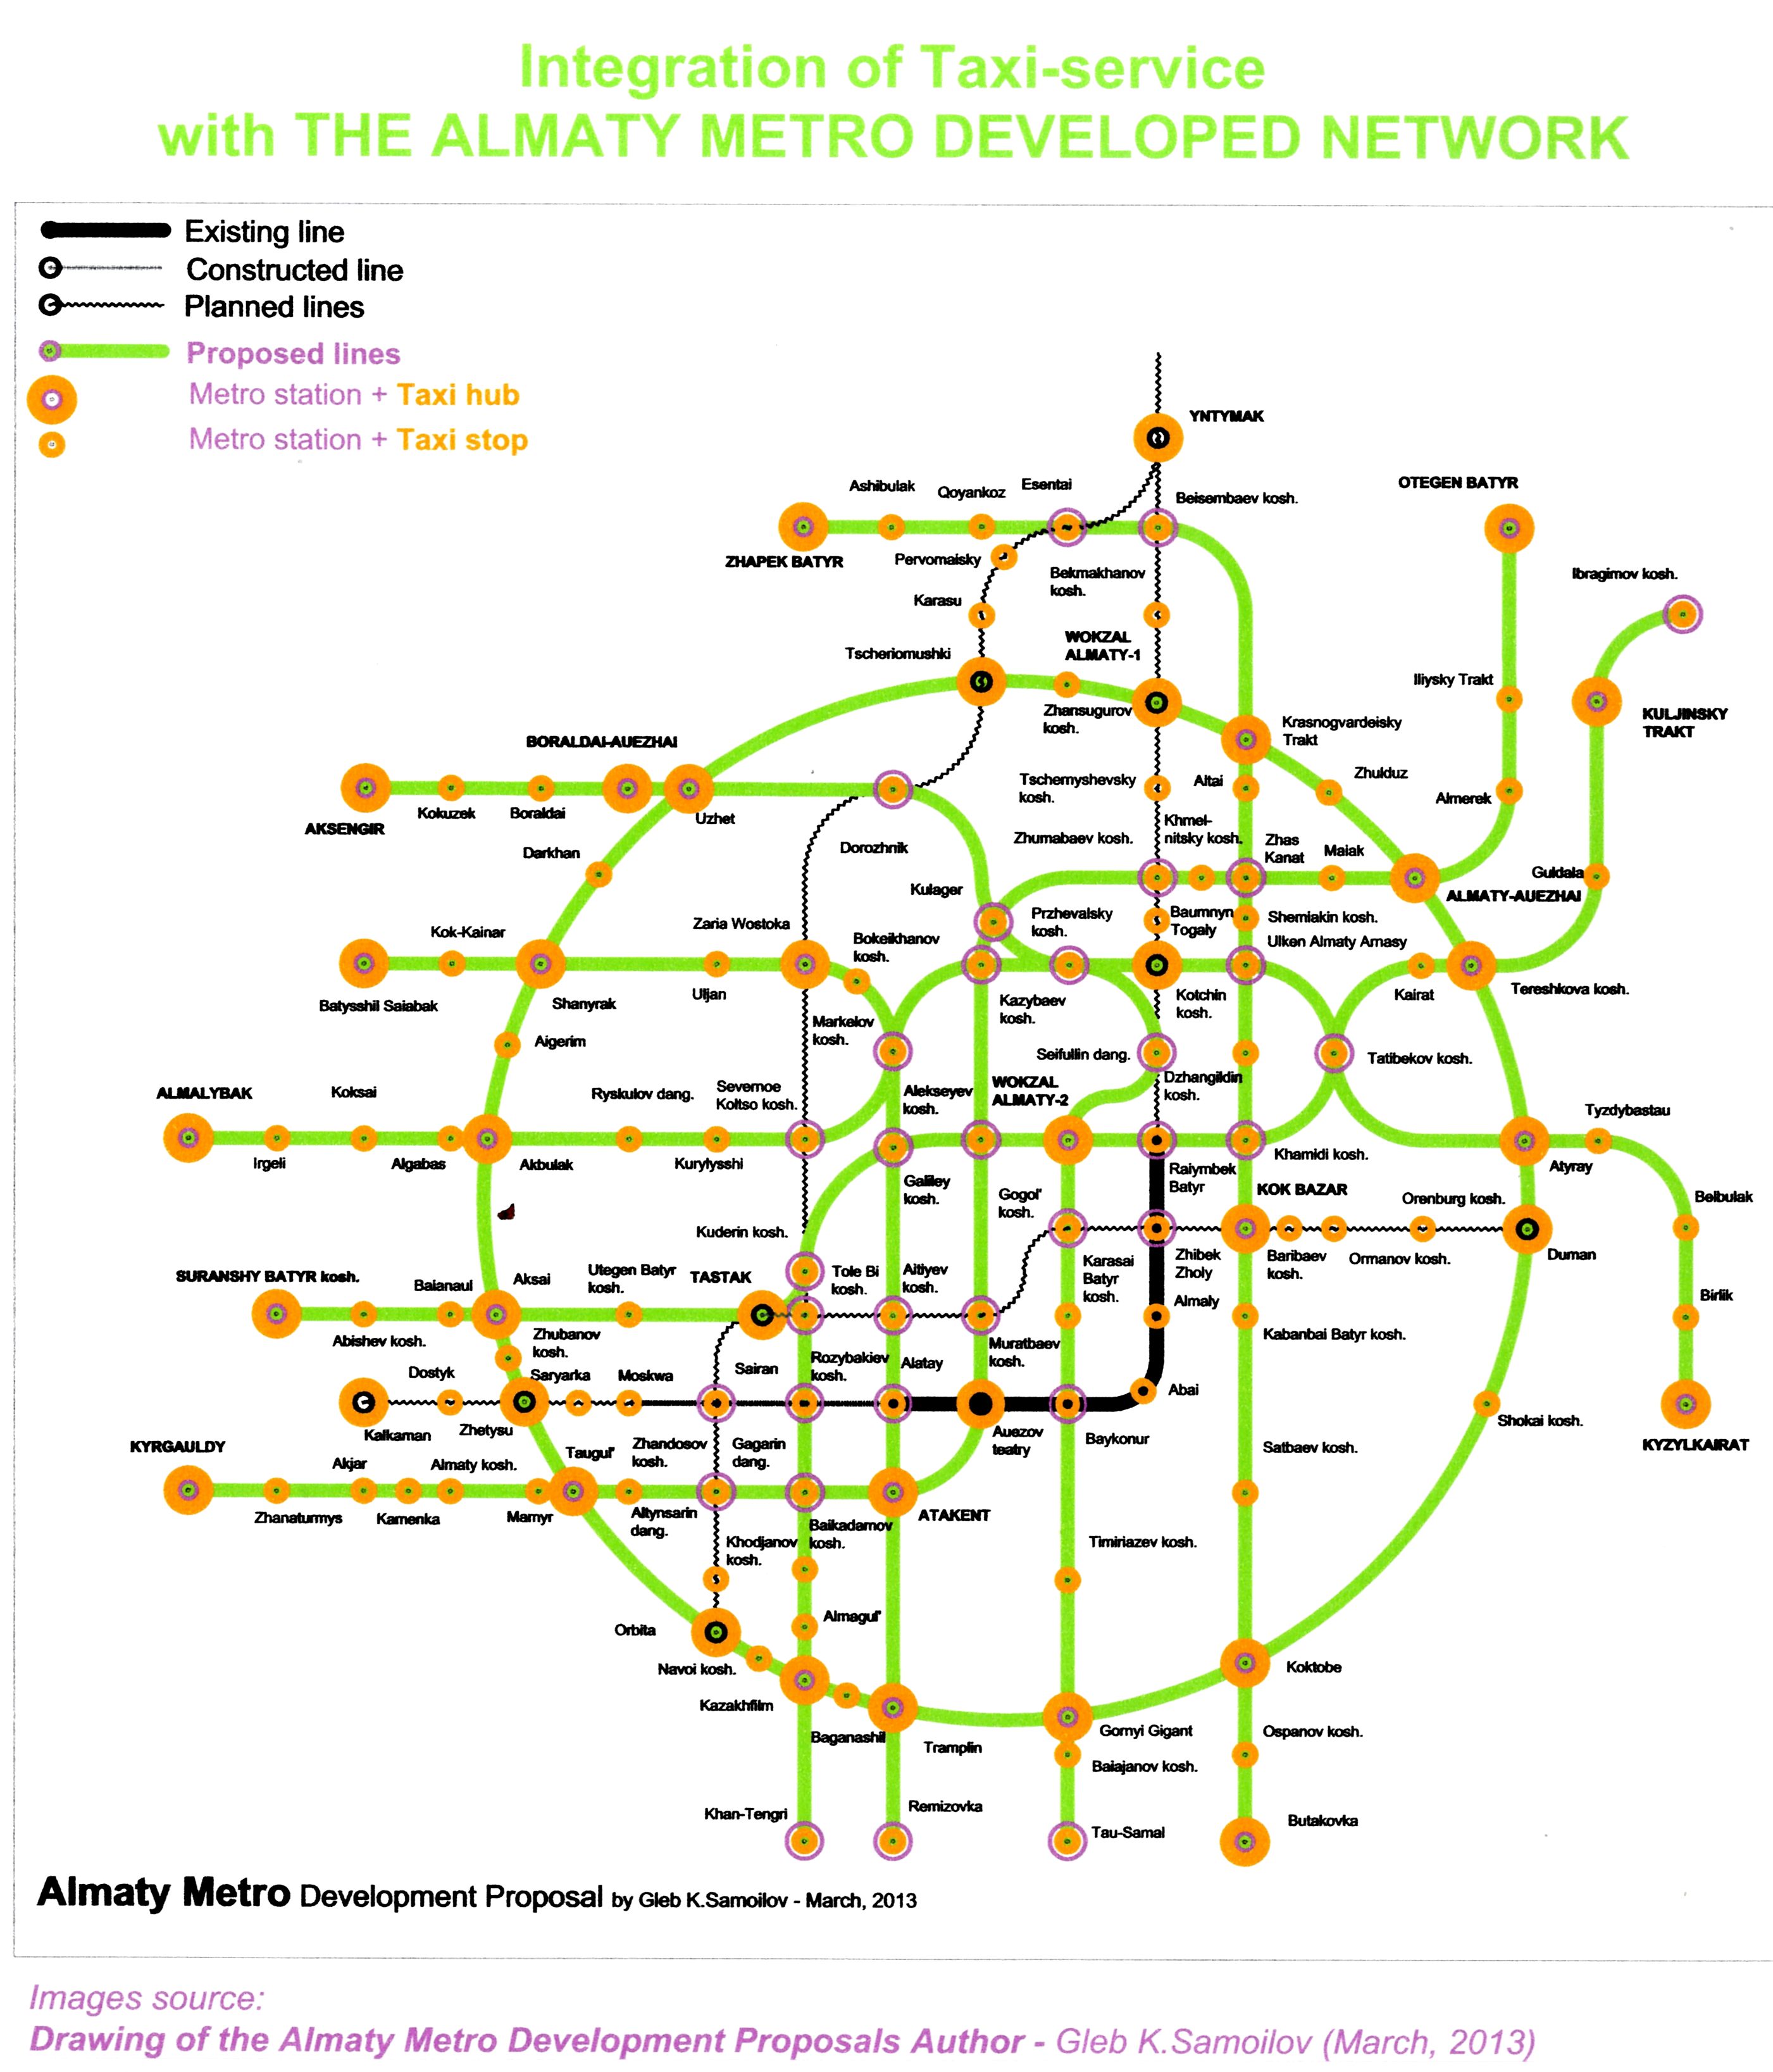 Almaty Metro Integration with the Taxi-service